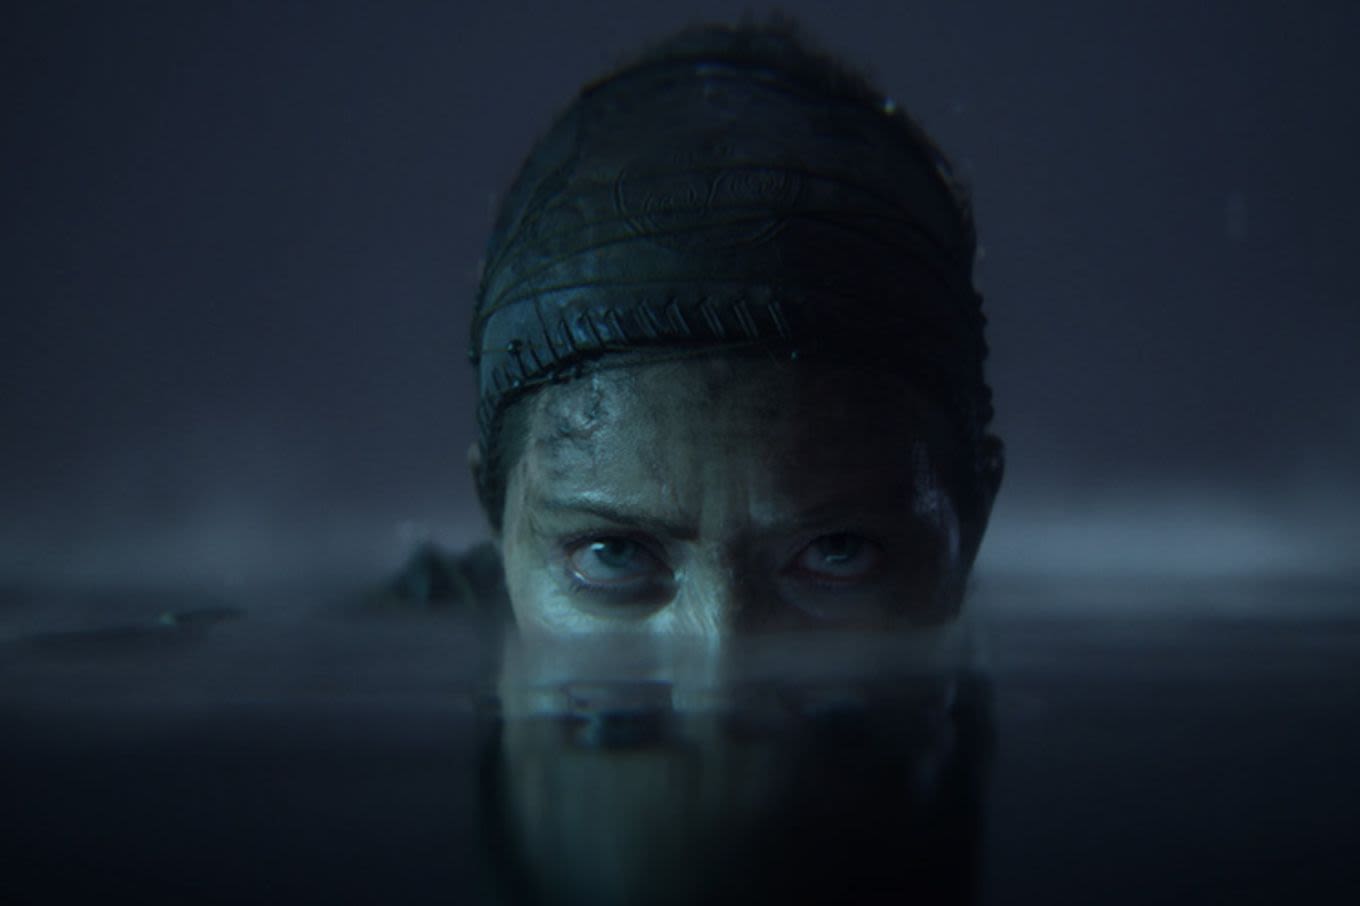 ‘Senua’s Saga: Hellblade II’ Has Officially Arrived: Here’s How To Get the Game Online